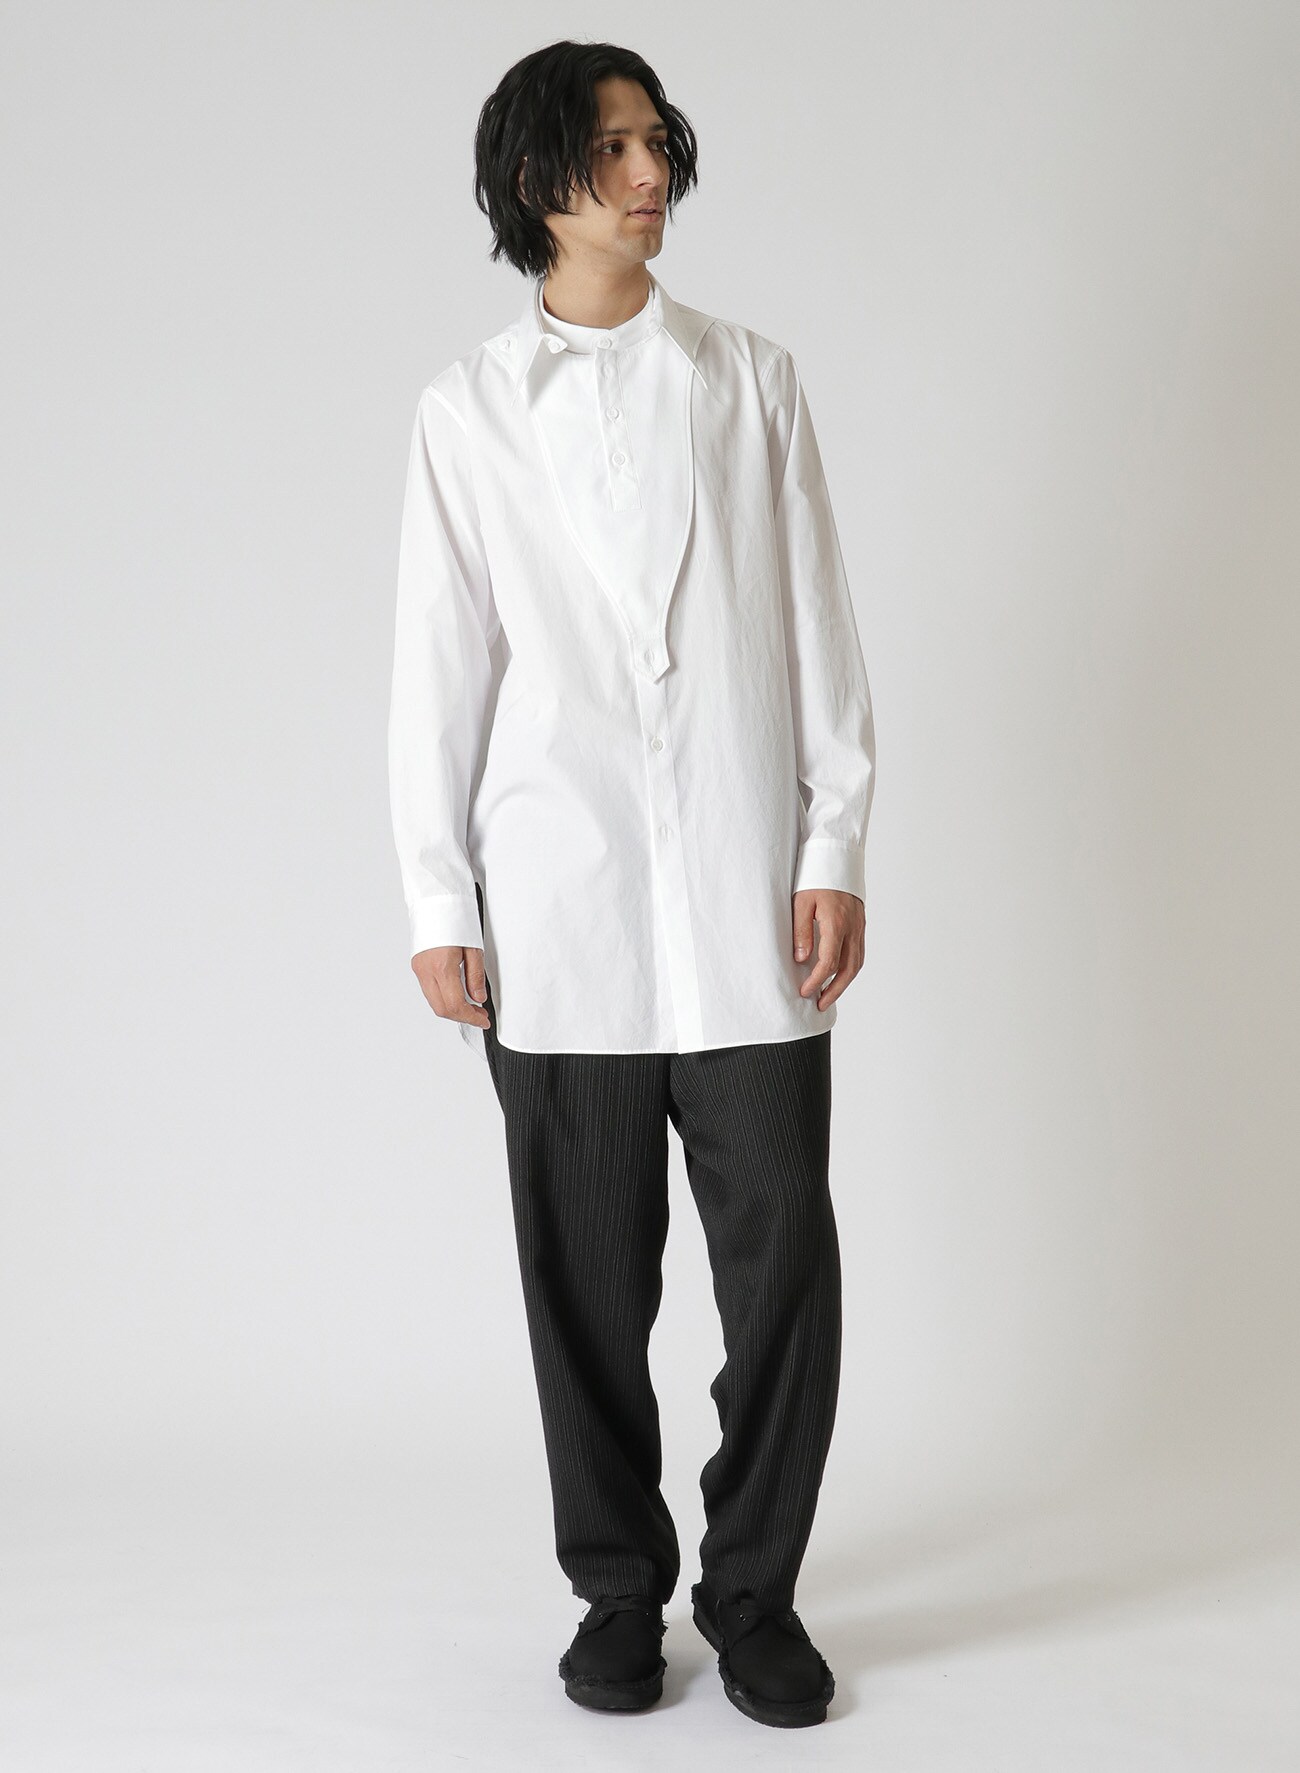 WA.T BROAD Y-PATCH SPARE COLLAR LONG(S White): power of the WHITE 